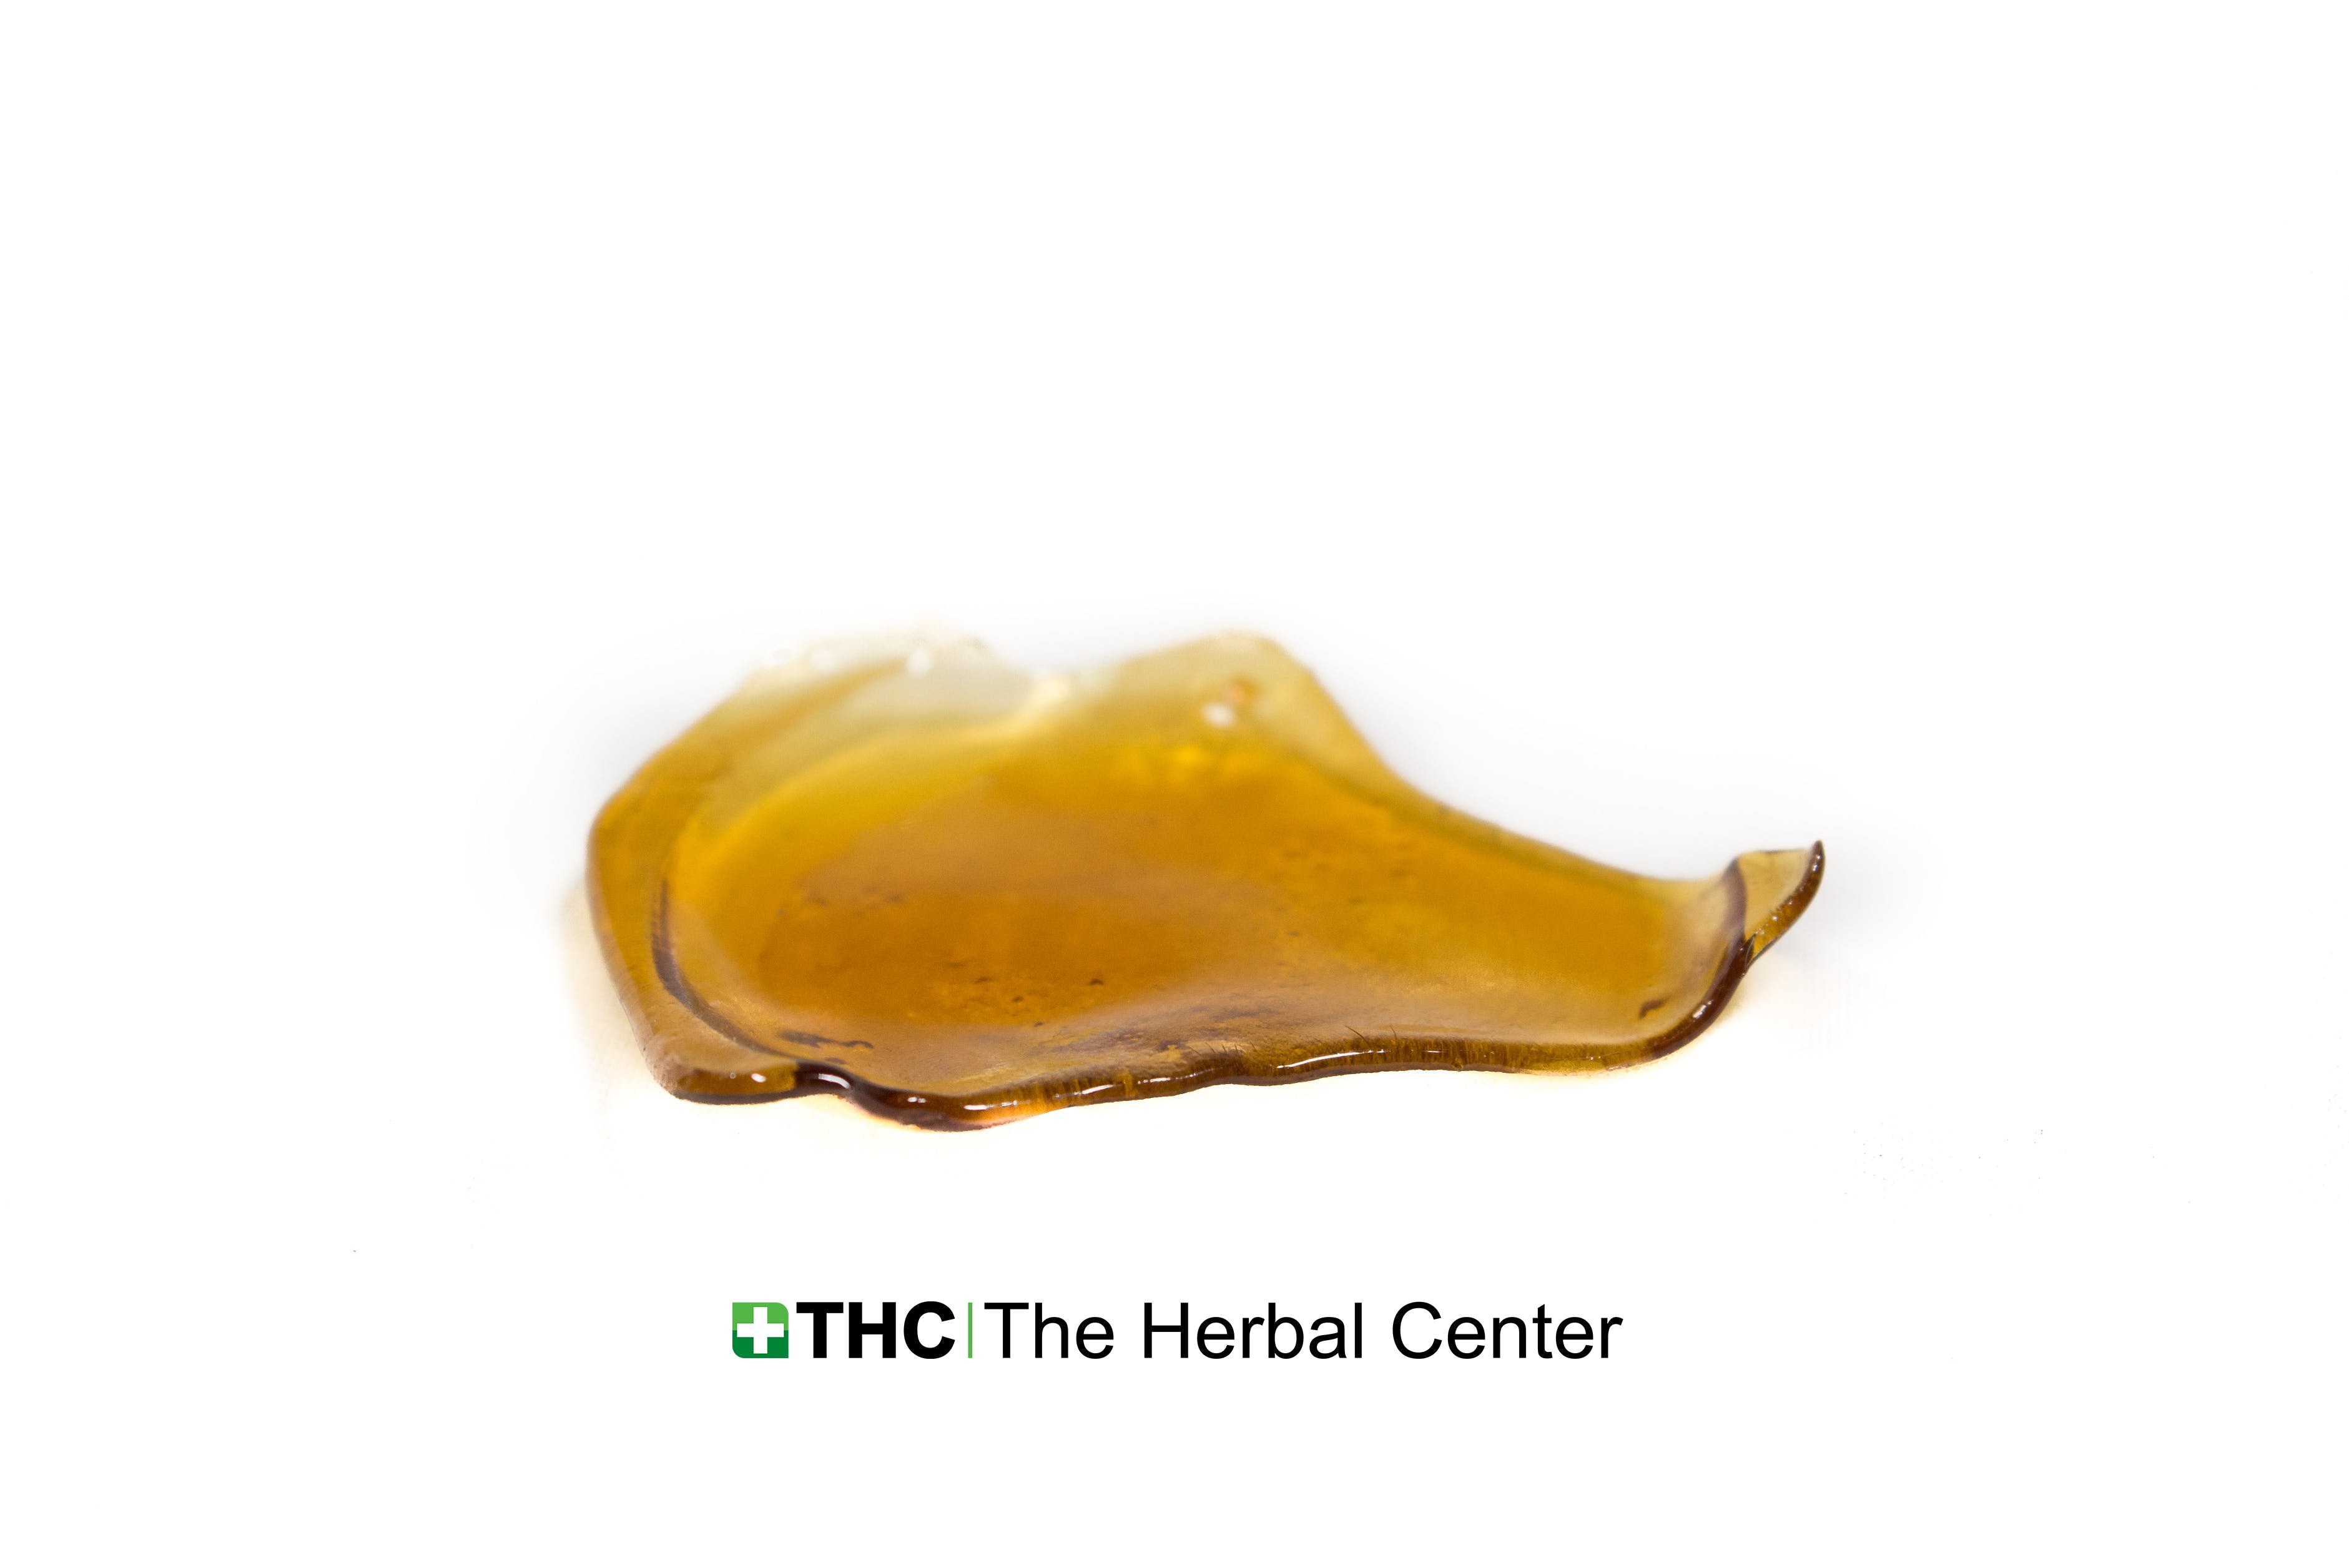 concentrate-clutch-extracts-shatter-1g